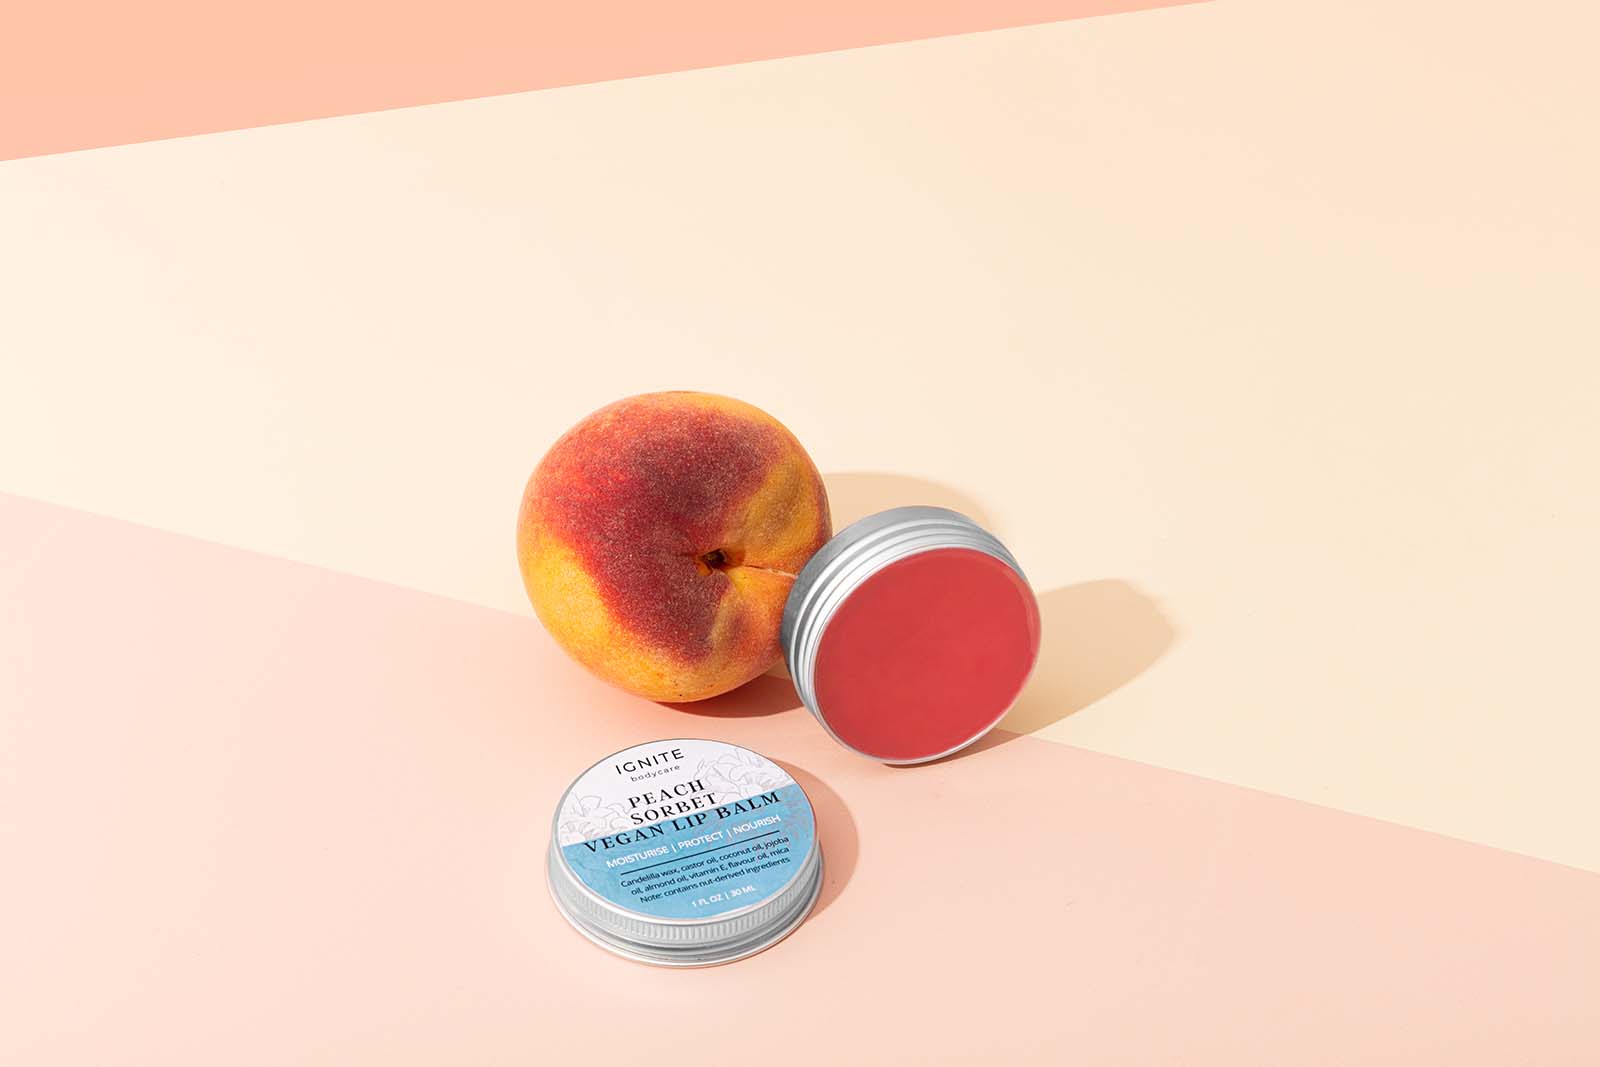 colourful aesthetic product photography for skincare brand ignite bodycare. Product Photography by Colourpop Stuido